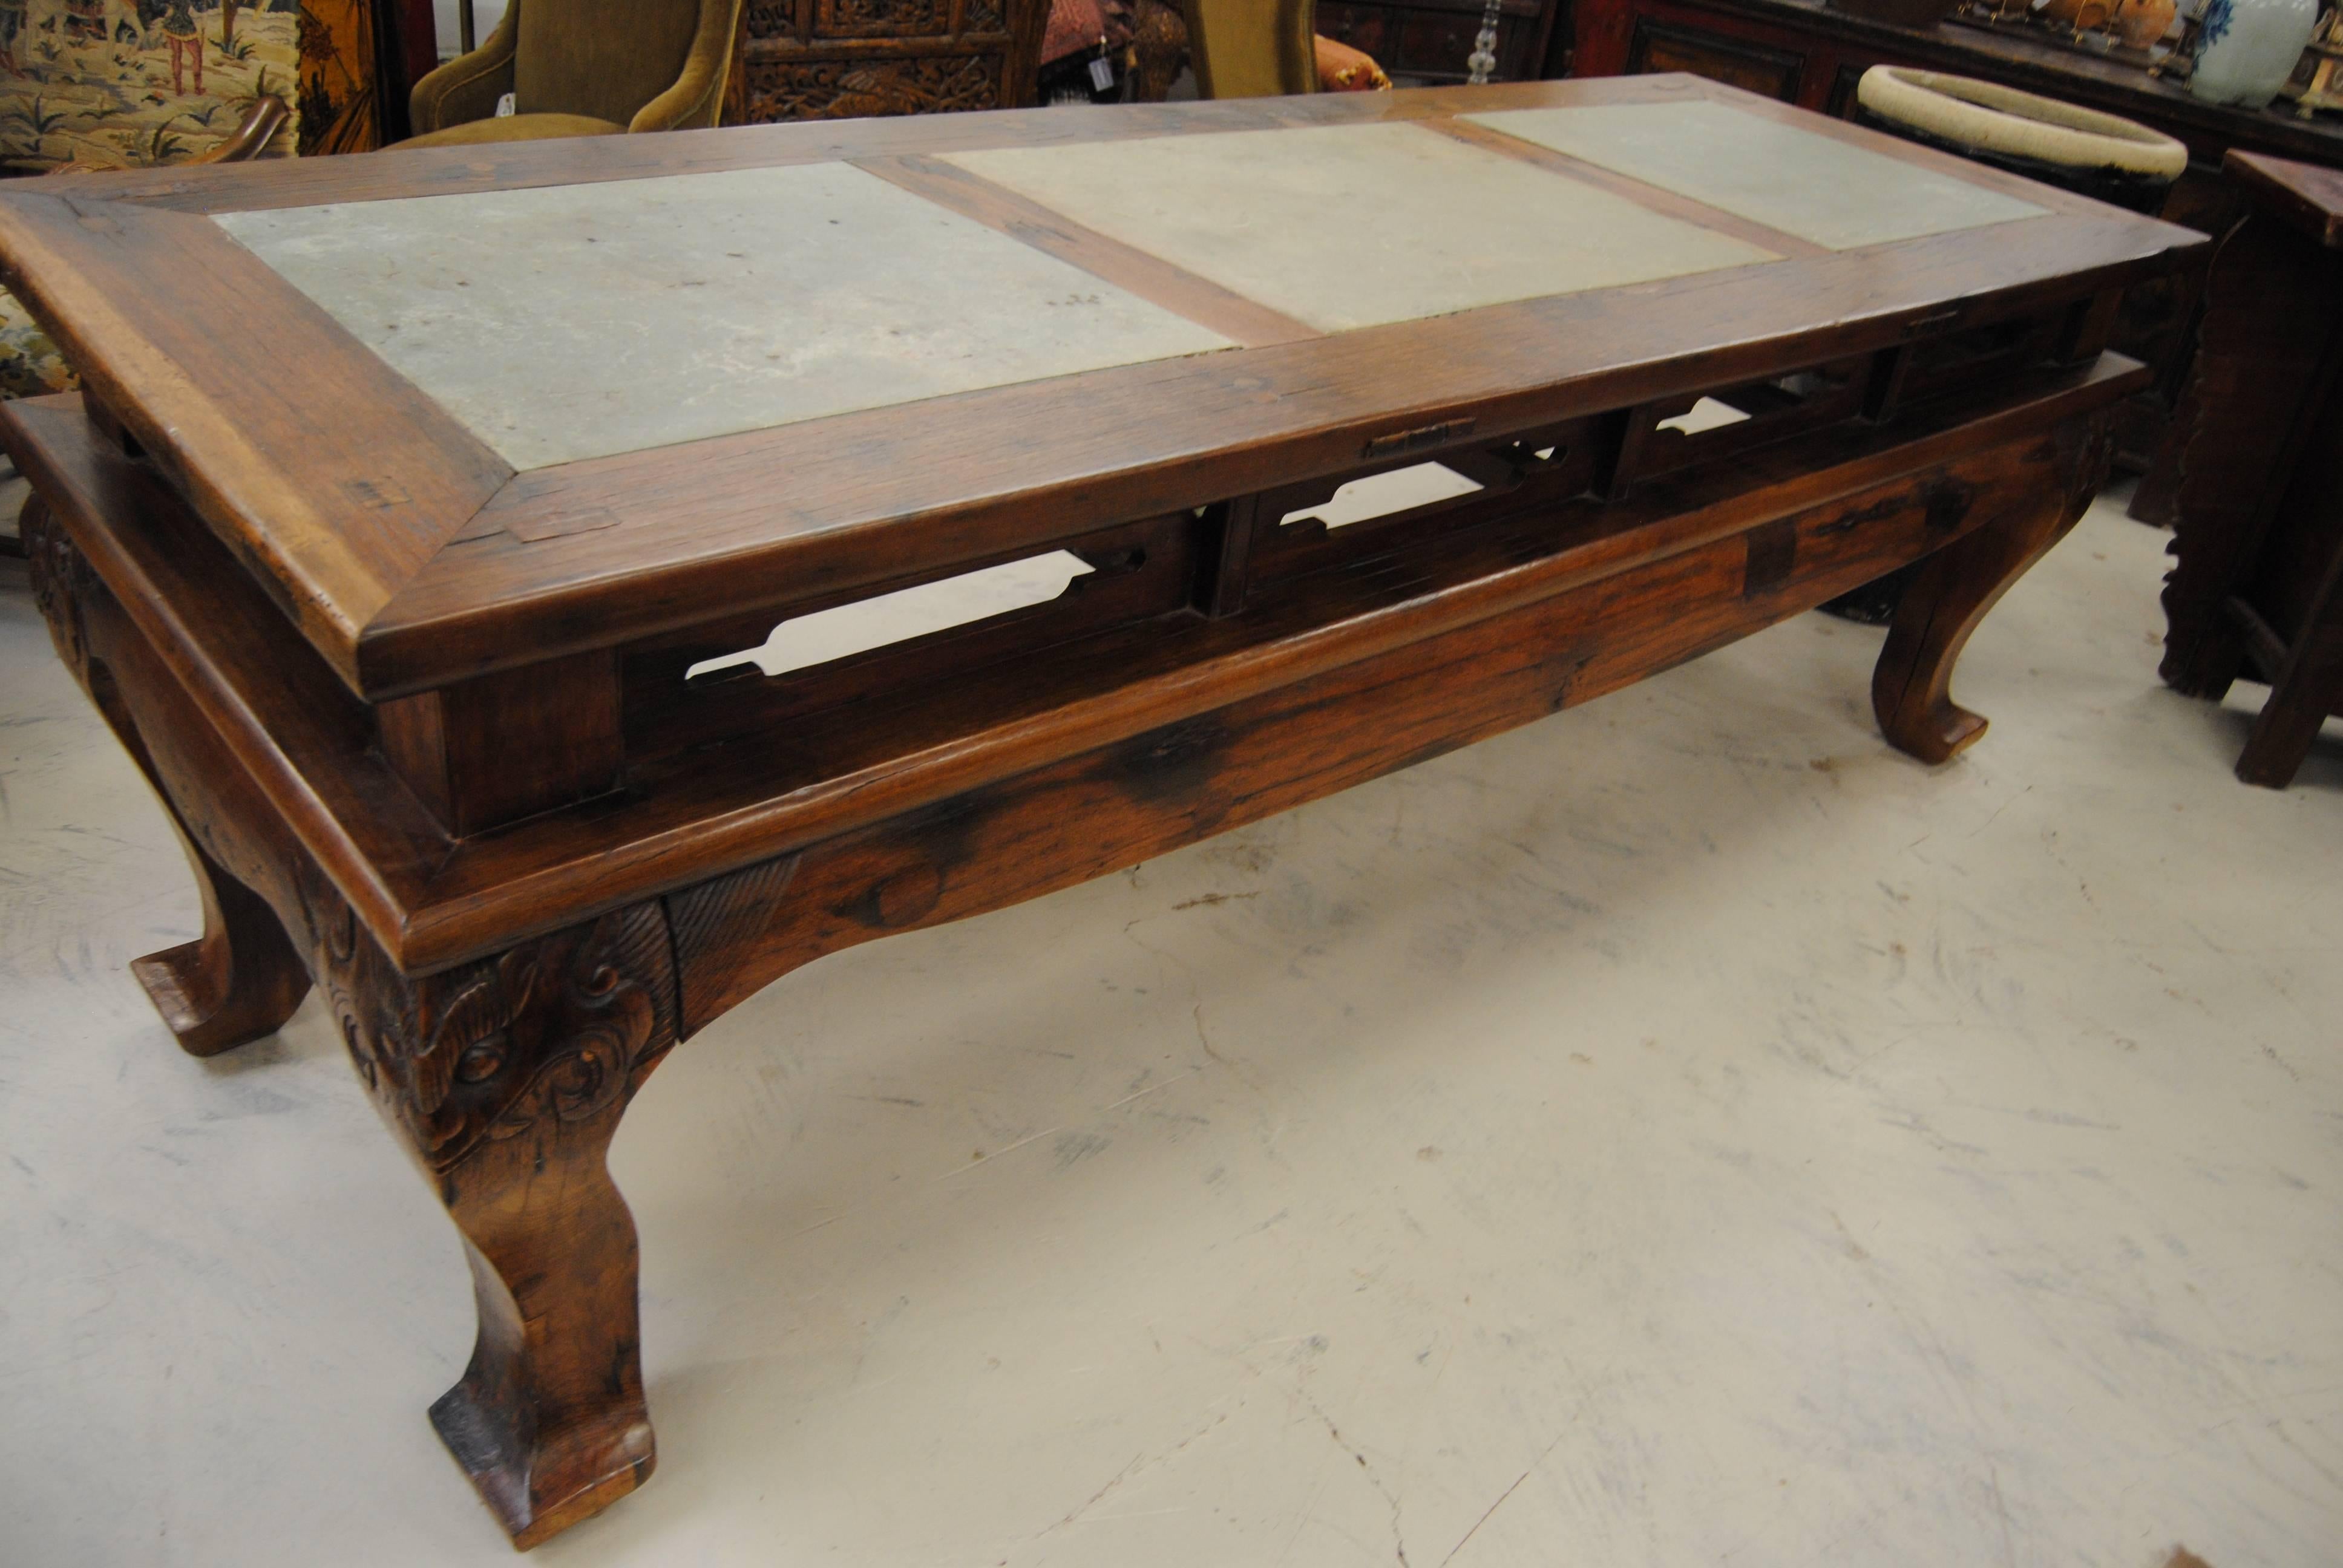 19th century ironwood Chinese scholar's table. The table has slate inserts and ledges along the sides to hold the calligraphy inks. Outstanding hand-carved faces on the four legs. Extremely heavy table. Perfect for the wine cellar tasting room!